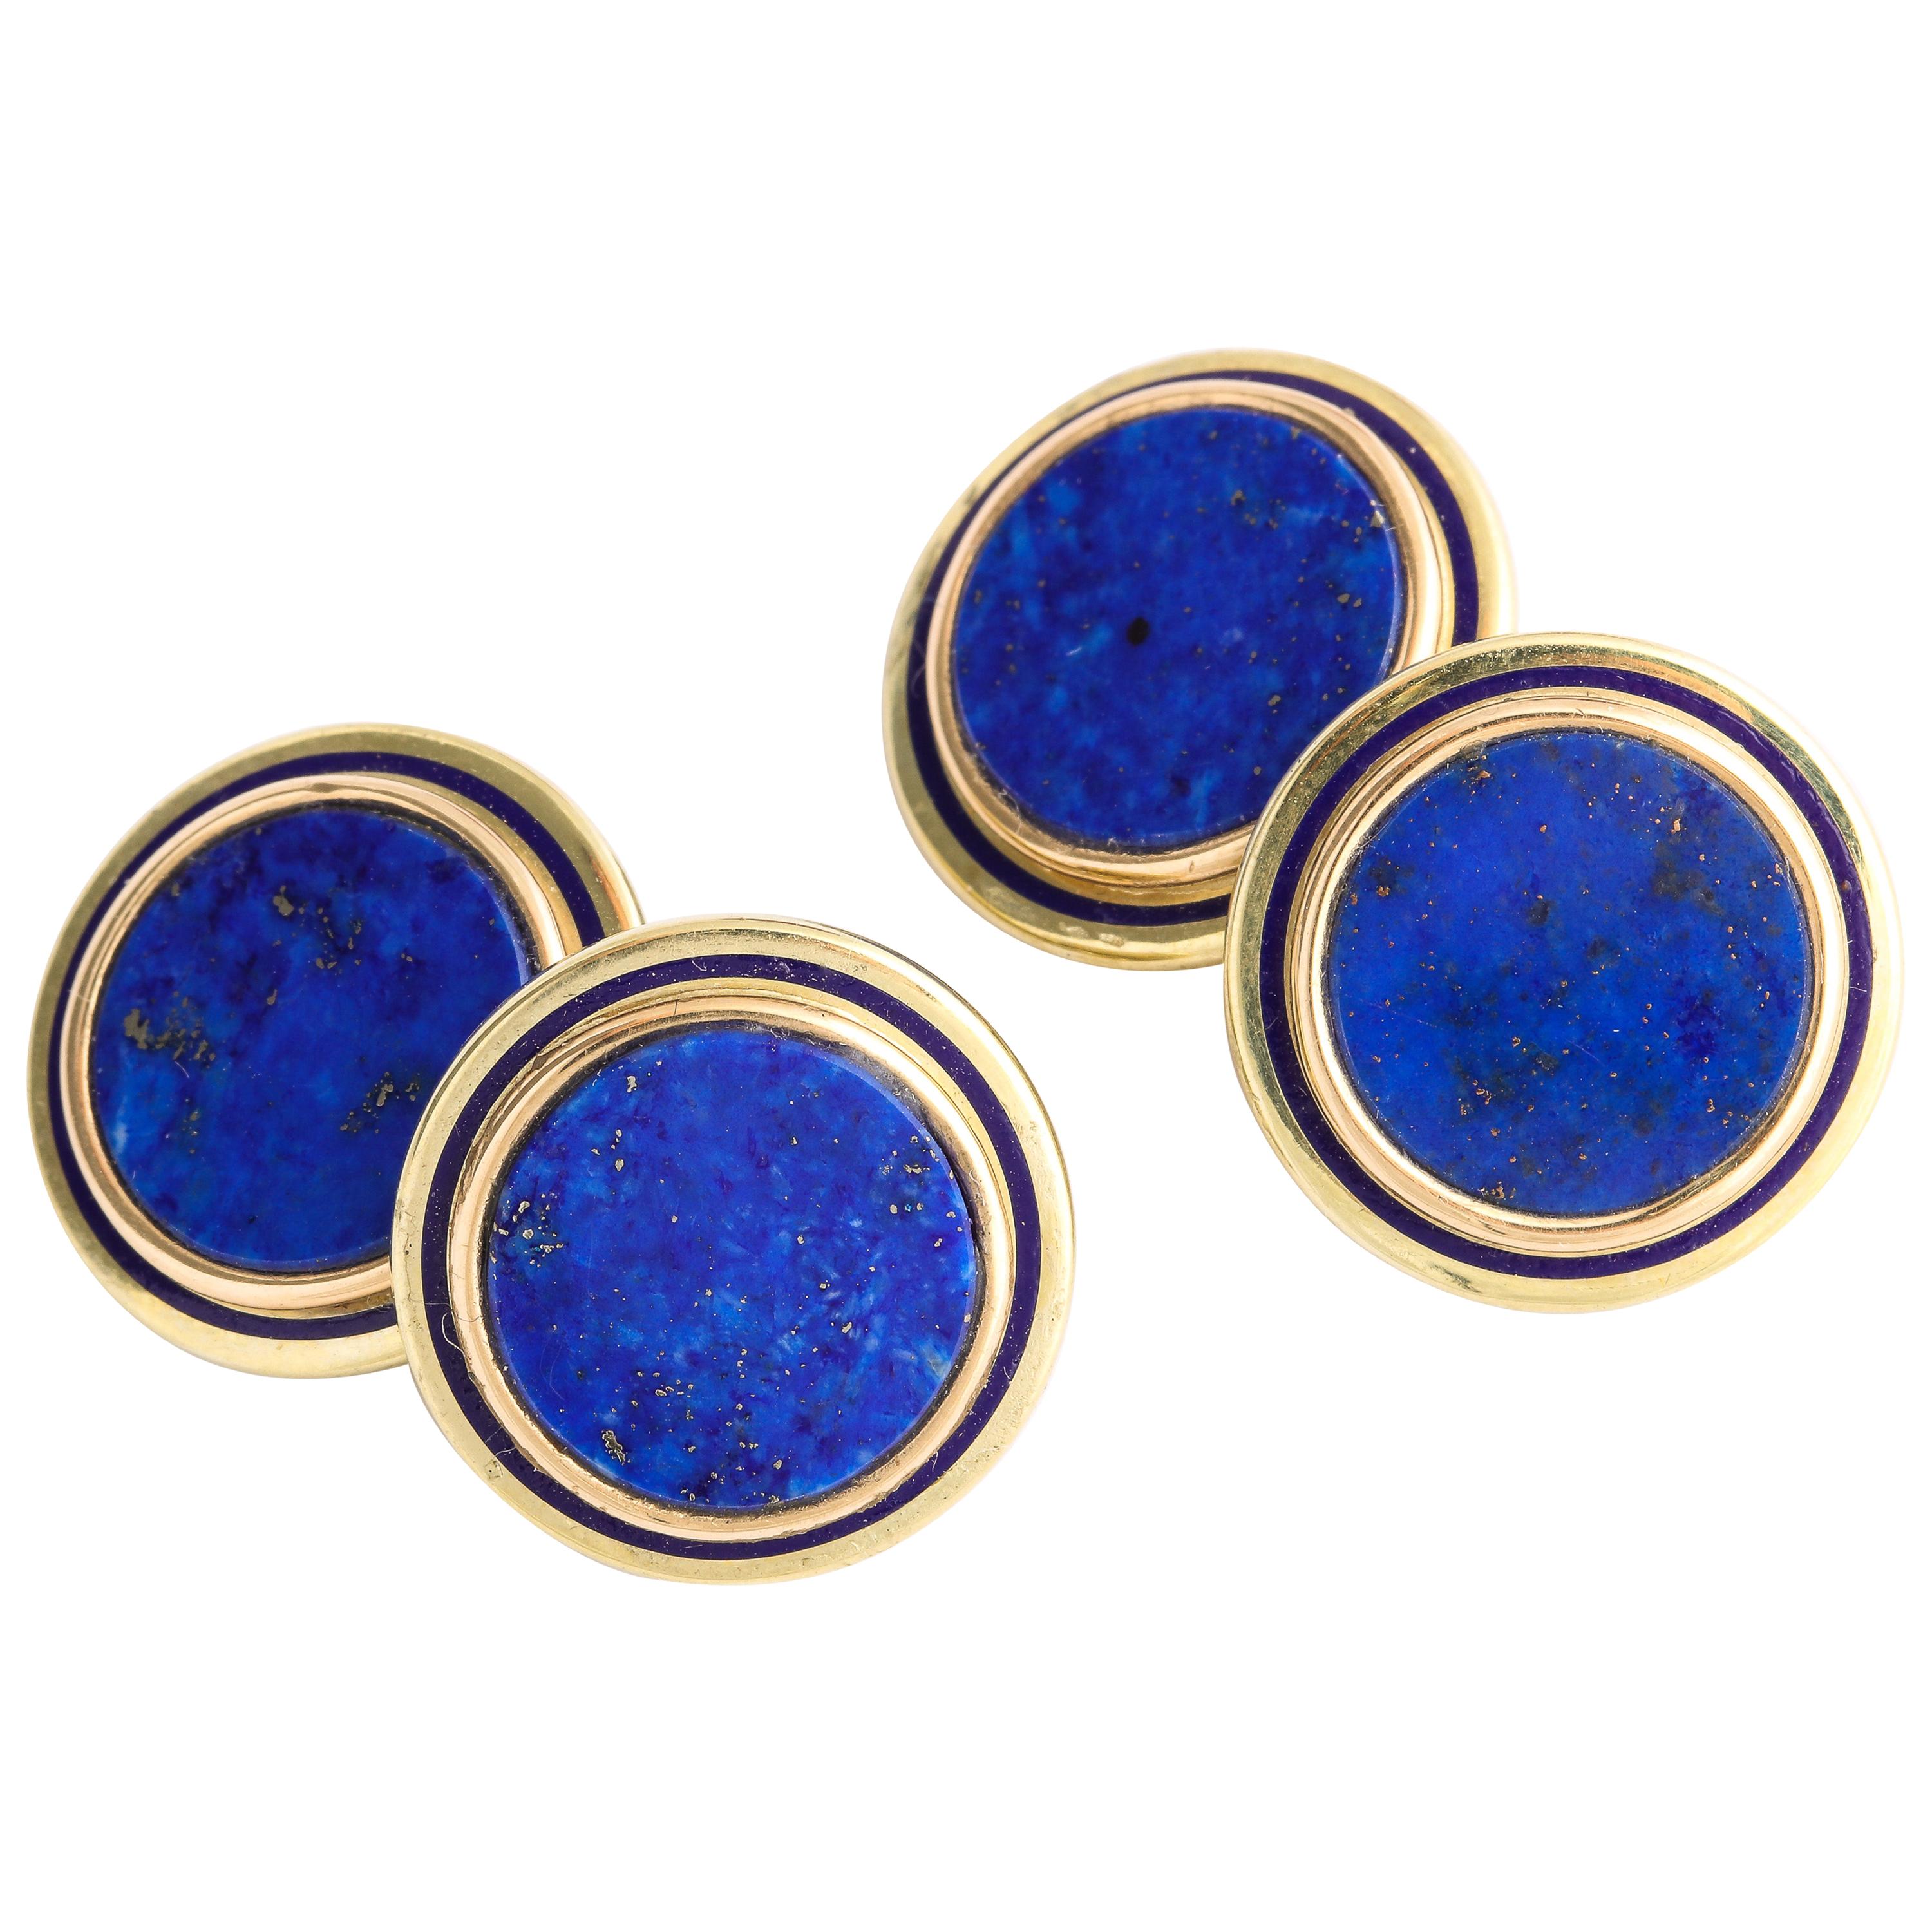 Rare Cartier Art Deco Royal Blue Lapis Lazuli Blue Enamel Edged Gold Cufflinks in their Original Cartier 5th Avenue 1920s Leather Silk Box. Fully signed CARTIER and marked 14kt gold. .55 inches diameter perfect for modern shirt cuffs. The ultimate